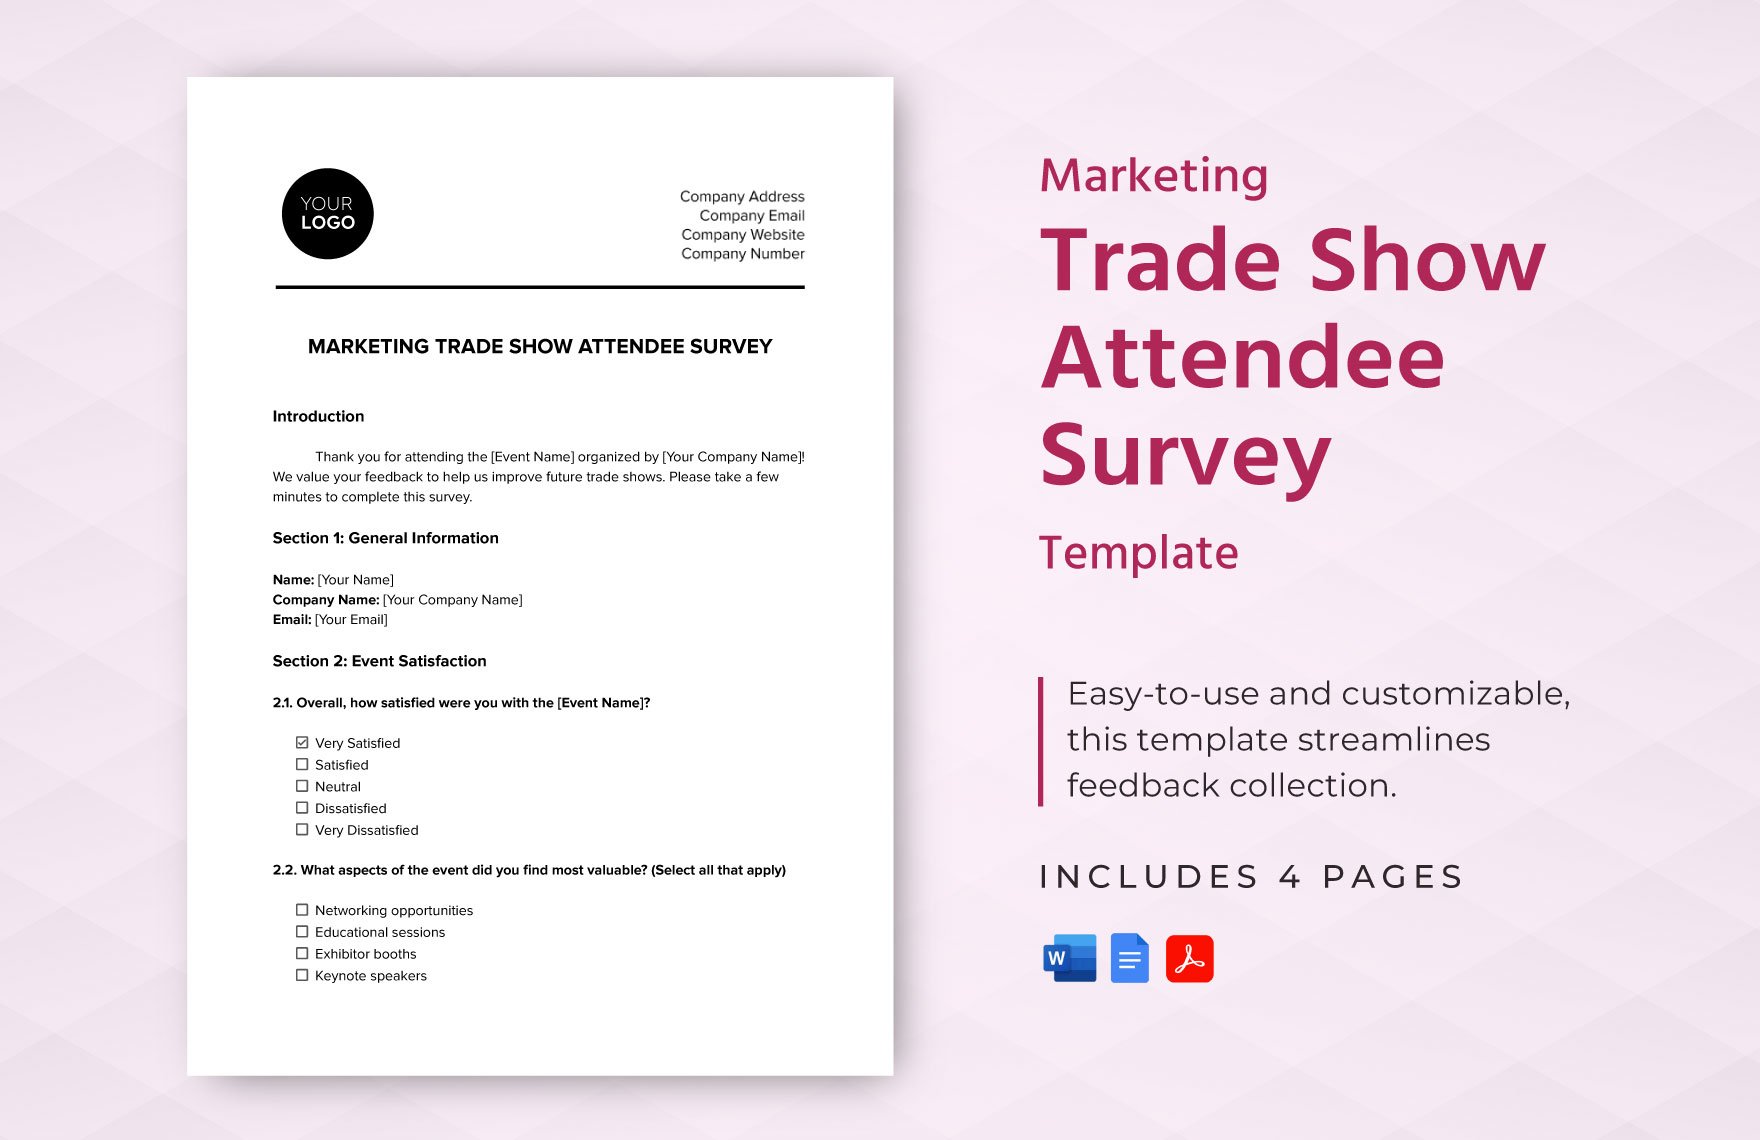 Marketing Trade Show Attendee Survey Template in Word, Google Docs, PDF